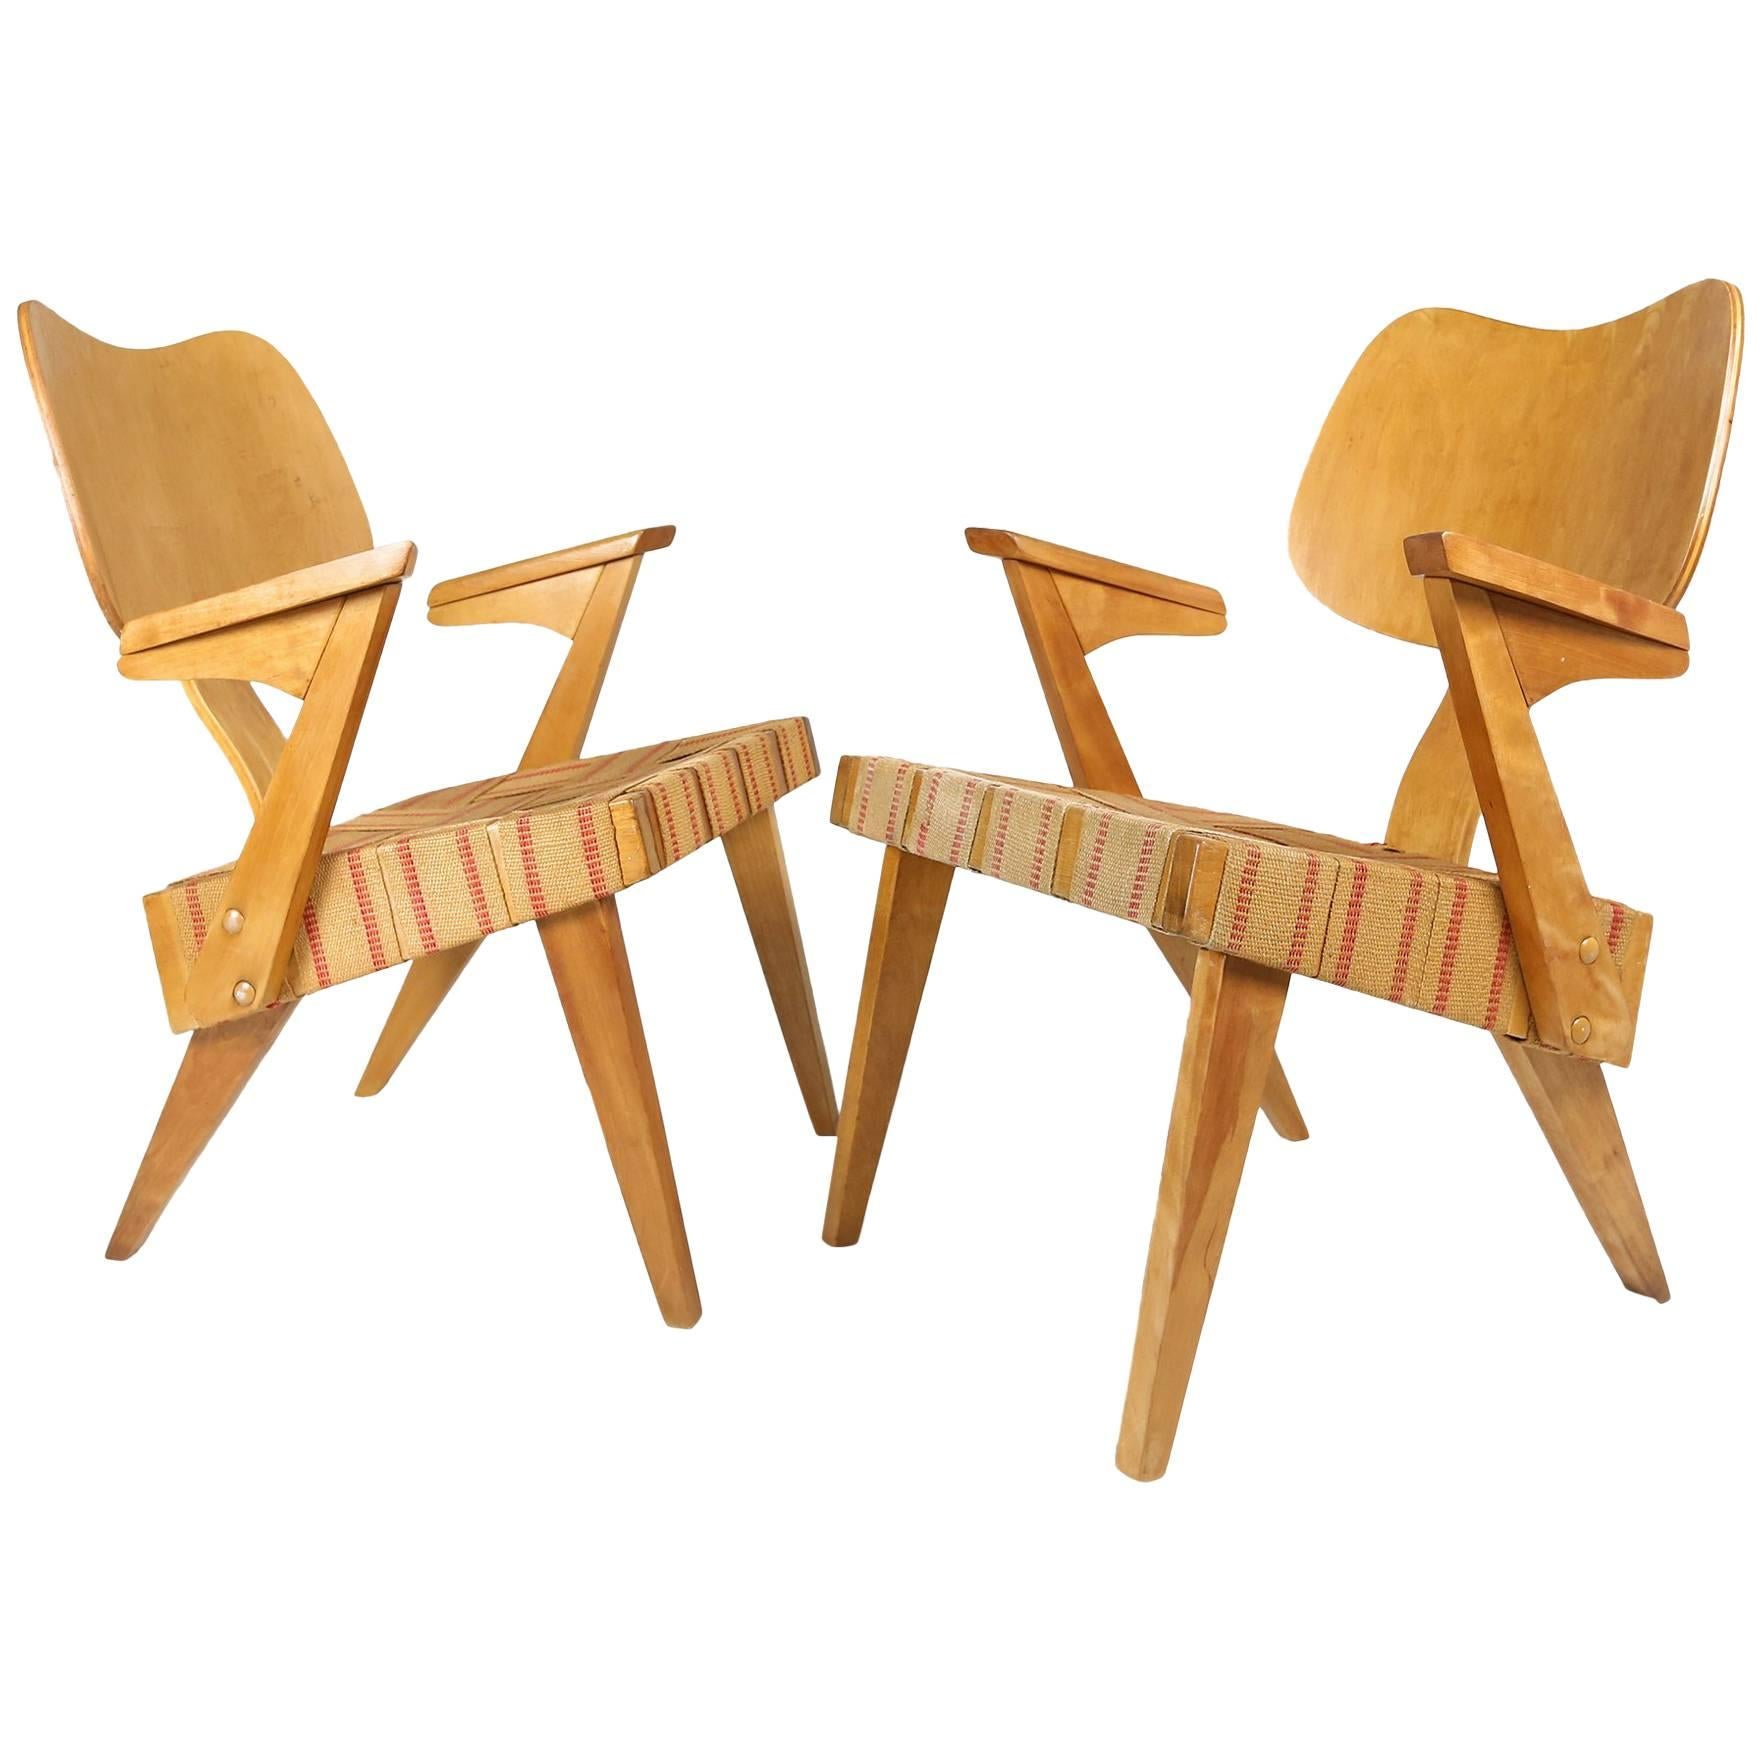 Pair of Original 1950s Russell Spanner "Ruspan" Chairs For Sale